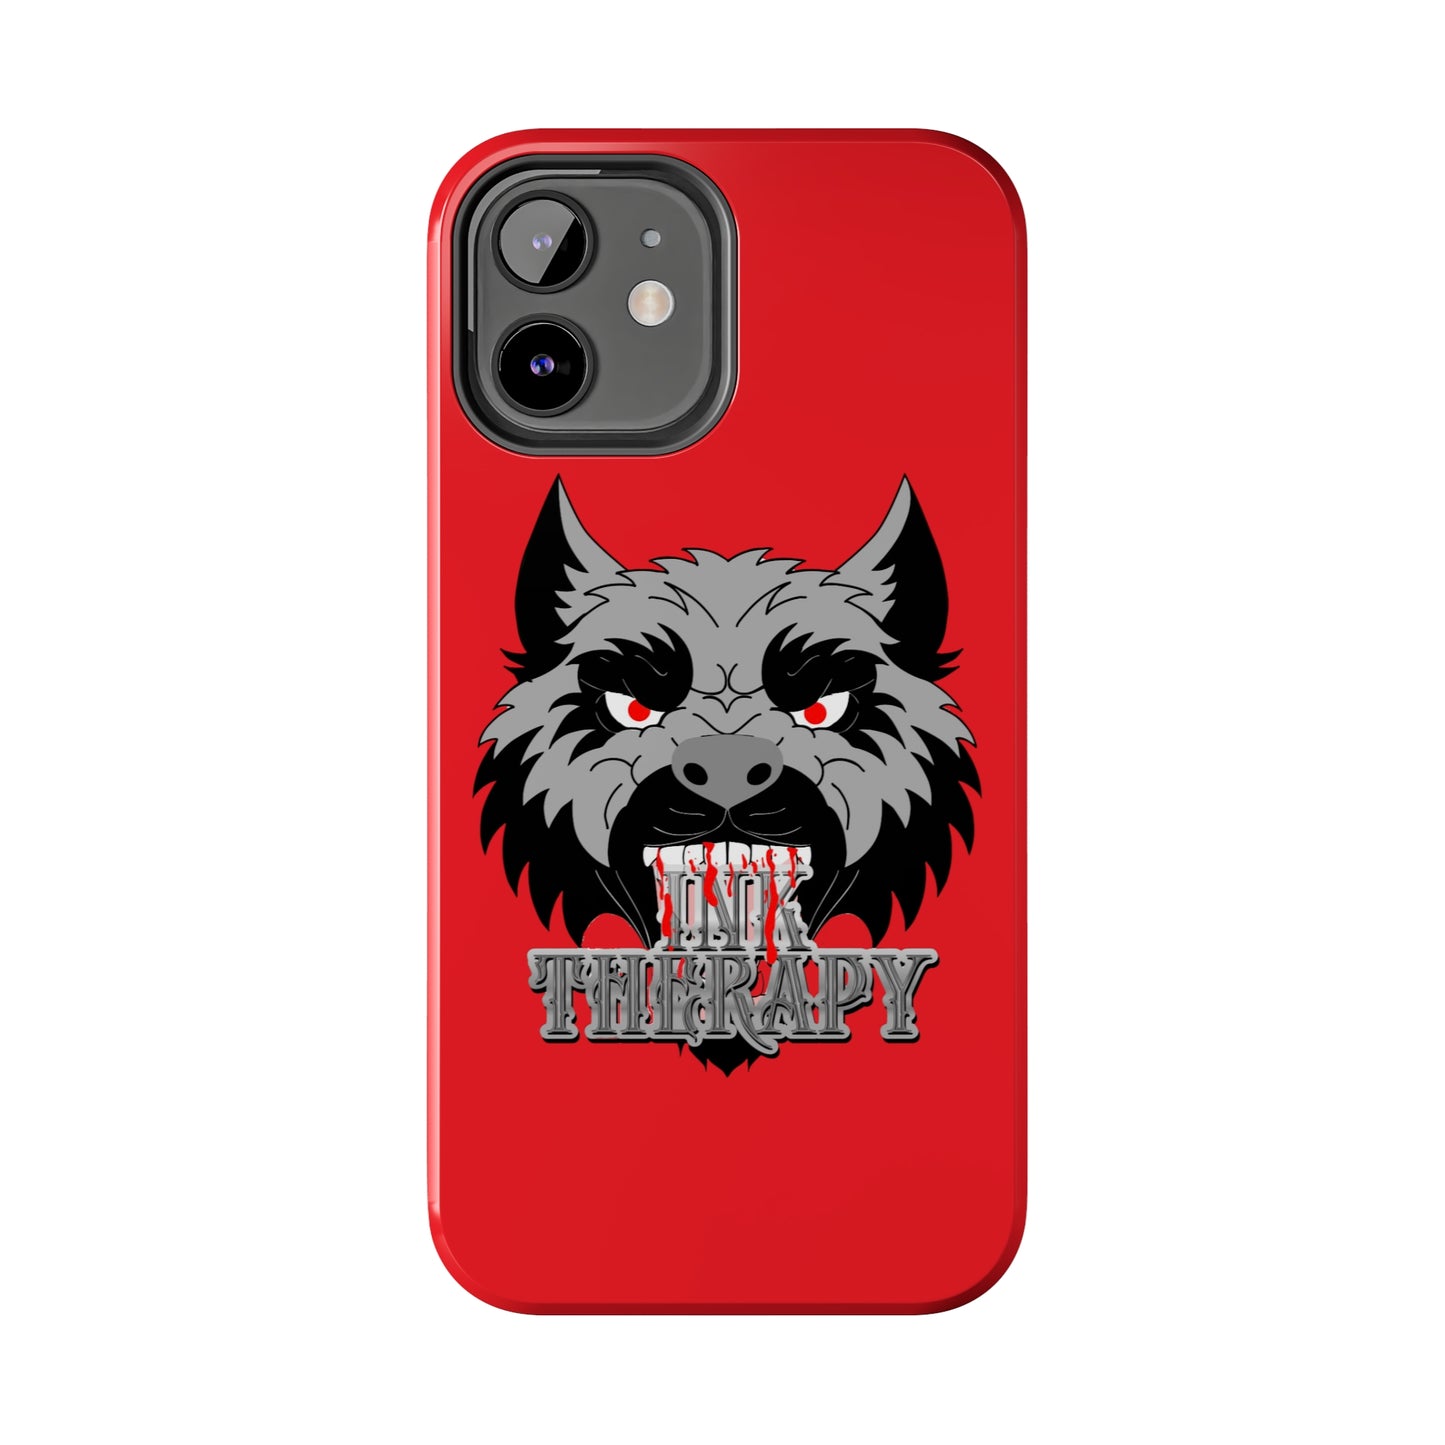 Wolfs InkTherapy Tough Phone Cases